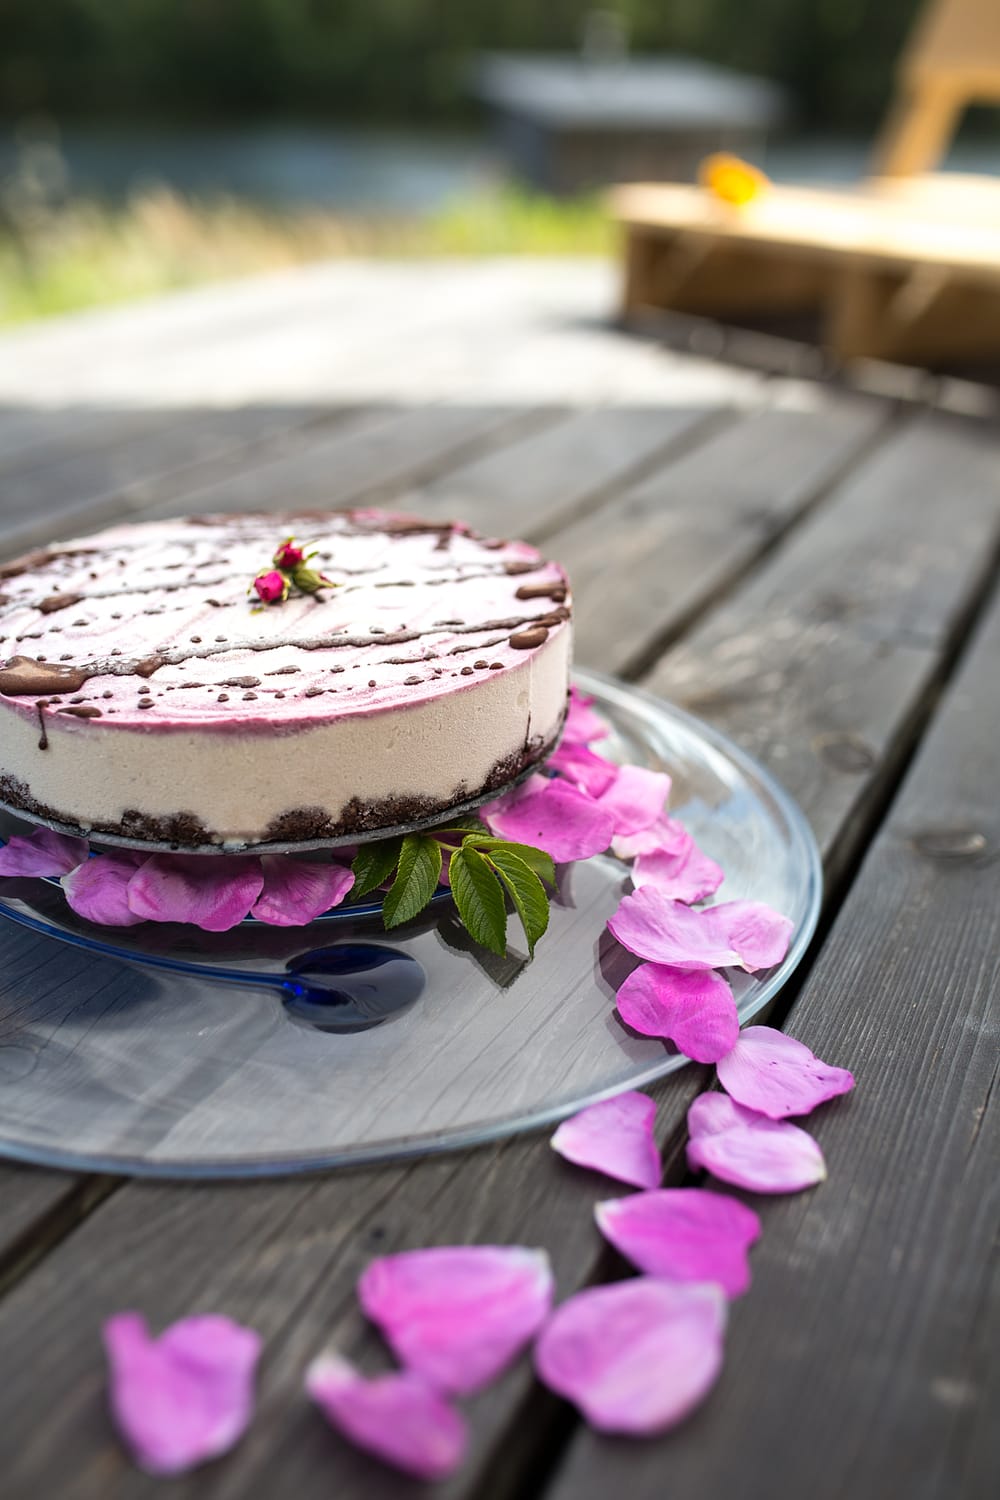 Cheesecake with rose petals